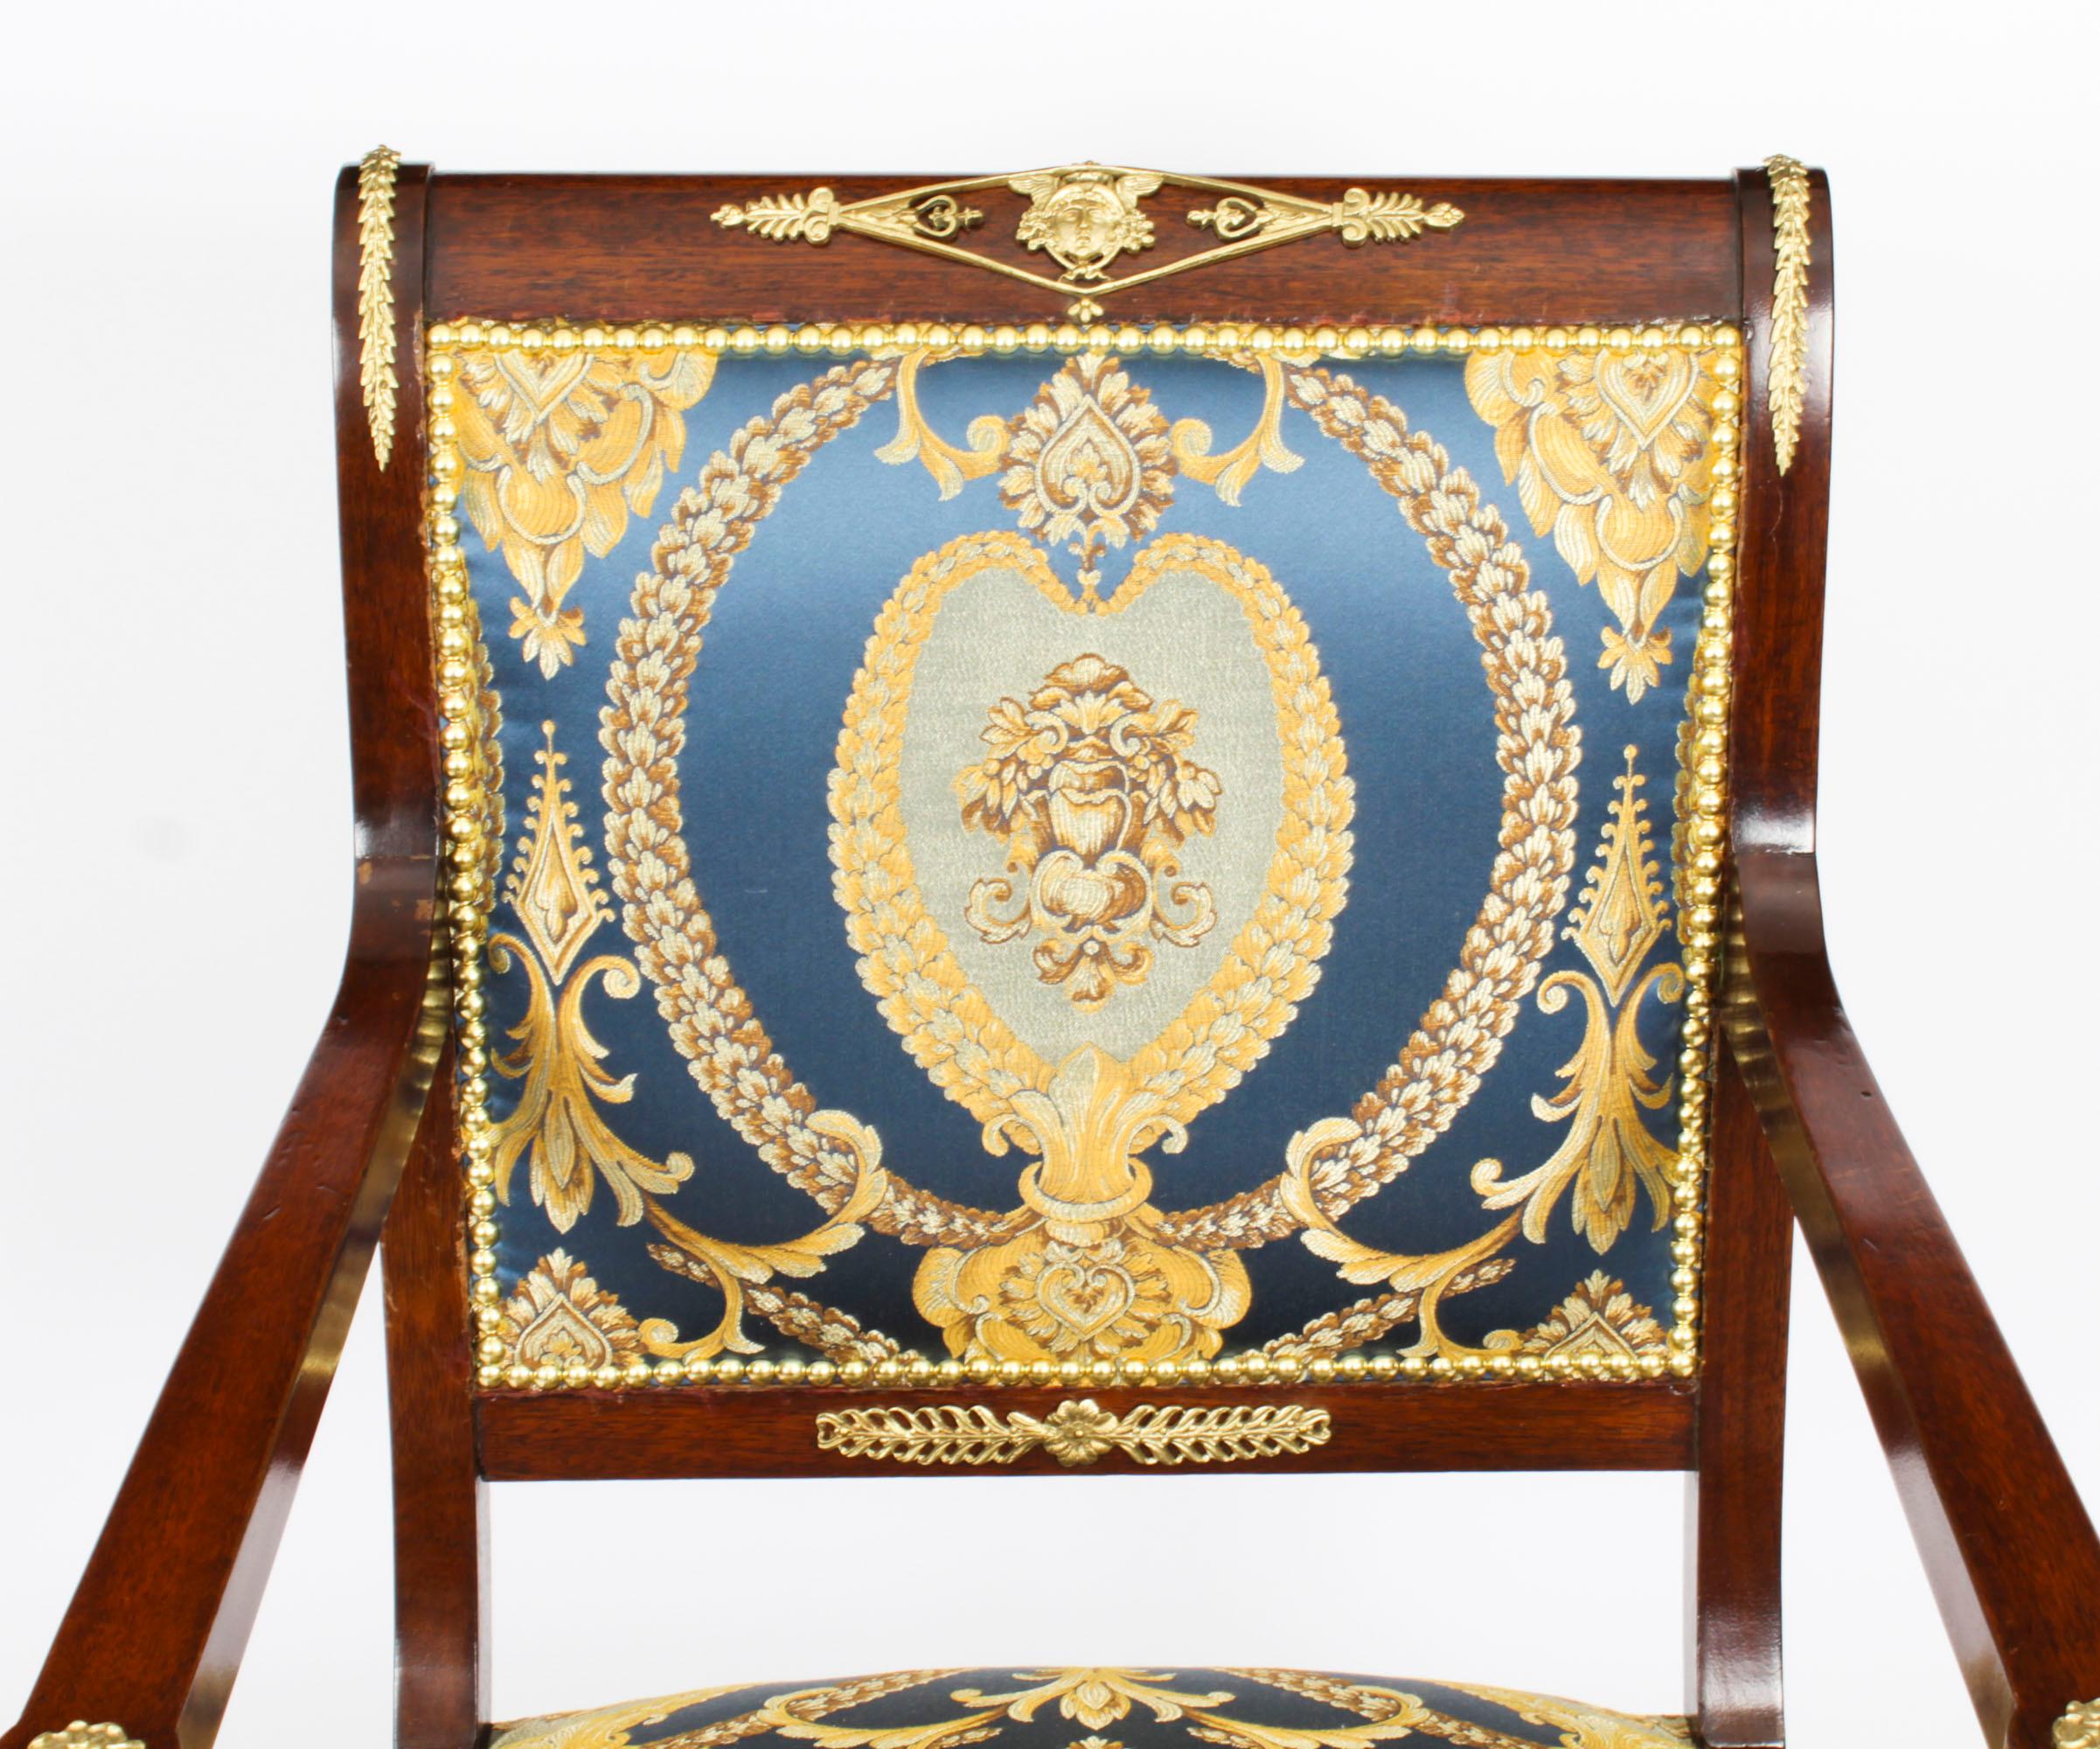 Late 19th Century Antique Pair Ormolu Mounted Armchairs Empire Revival 19th Century